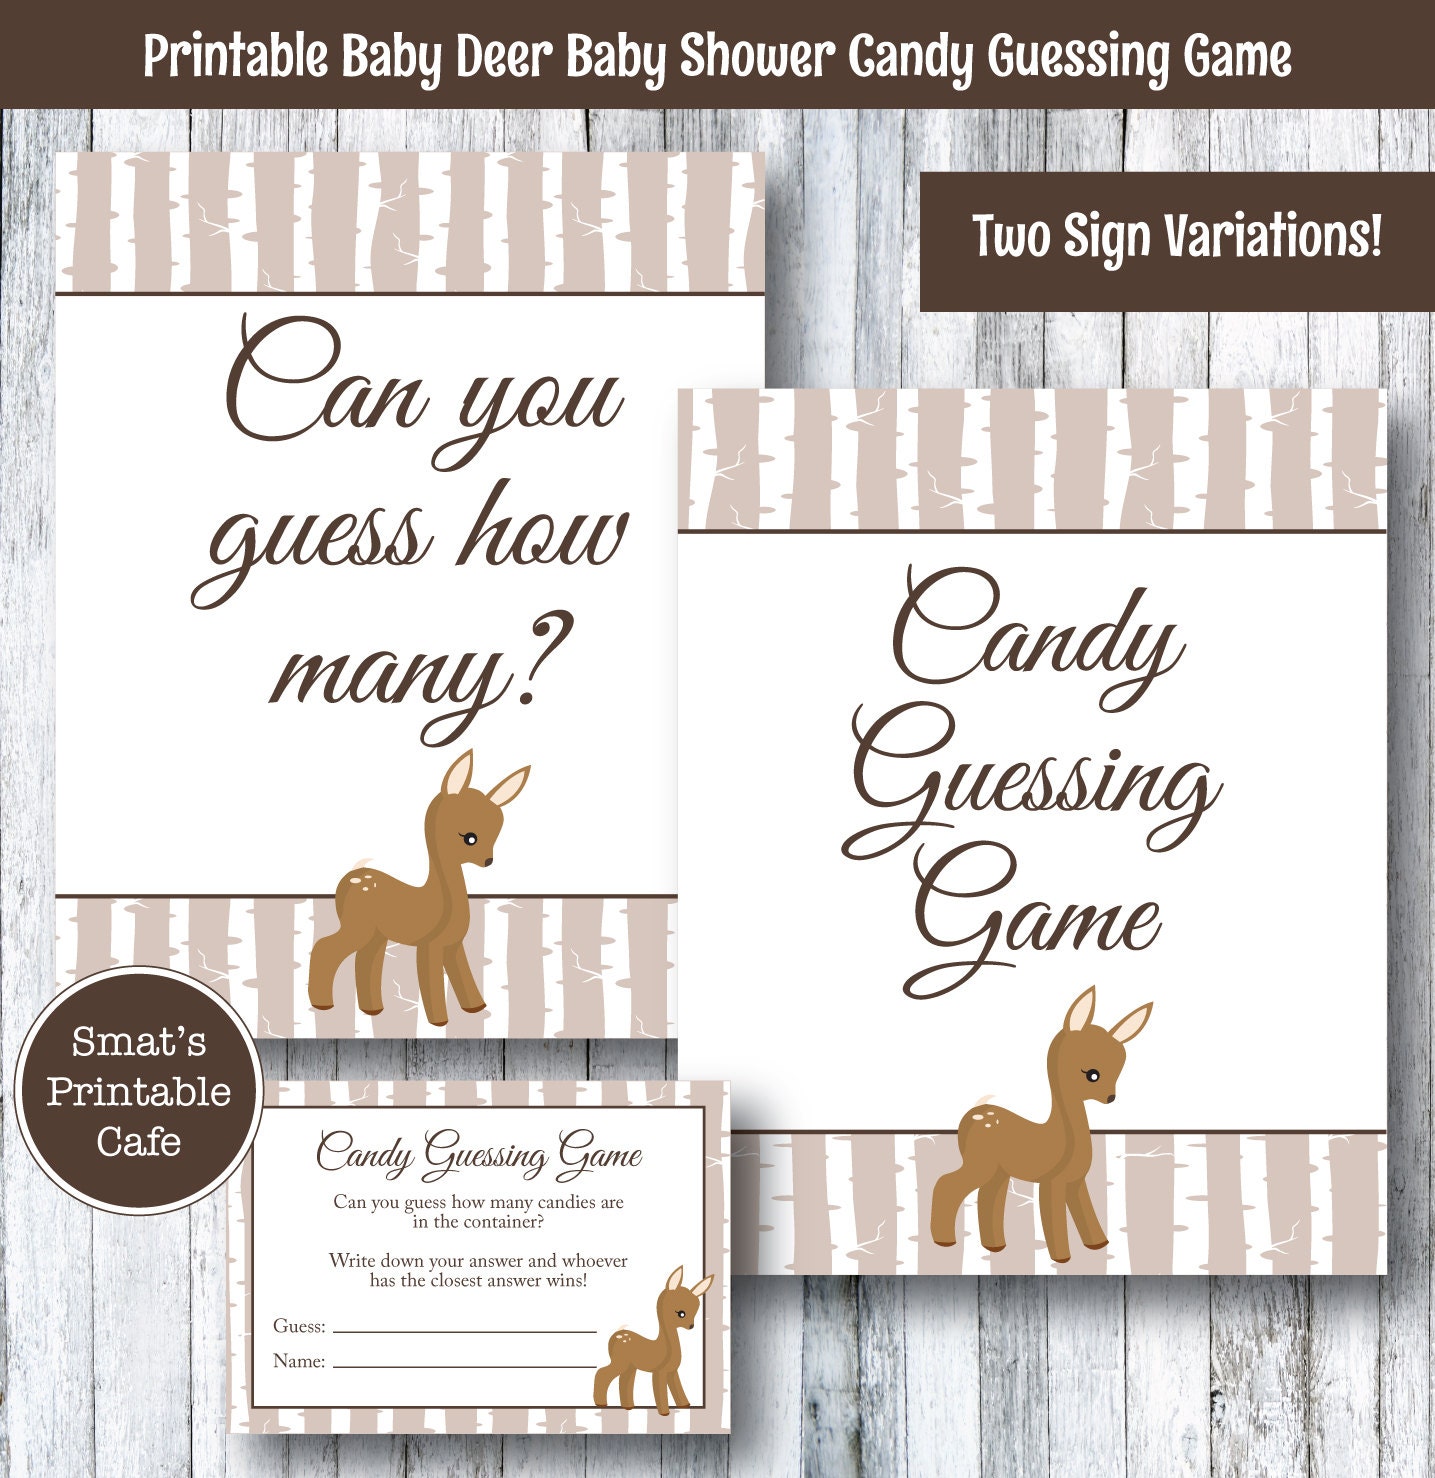 Baby Deer Baby Shower Candy Guessing Game PRINTABLE Rustic